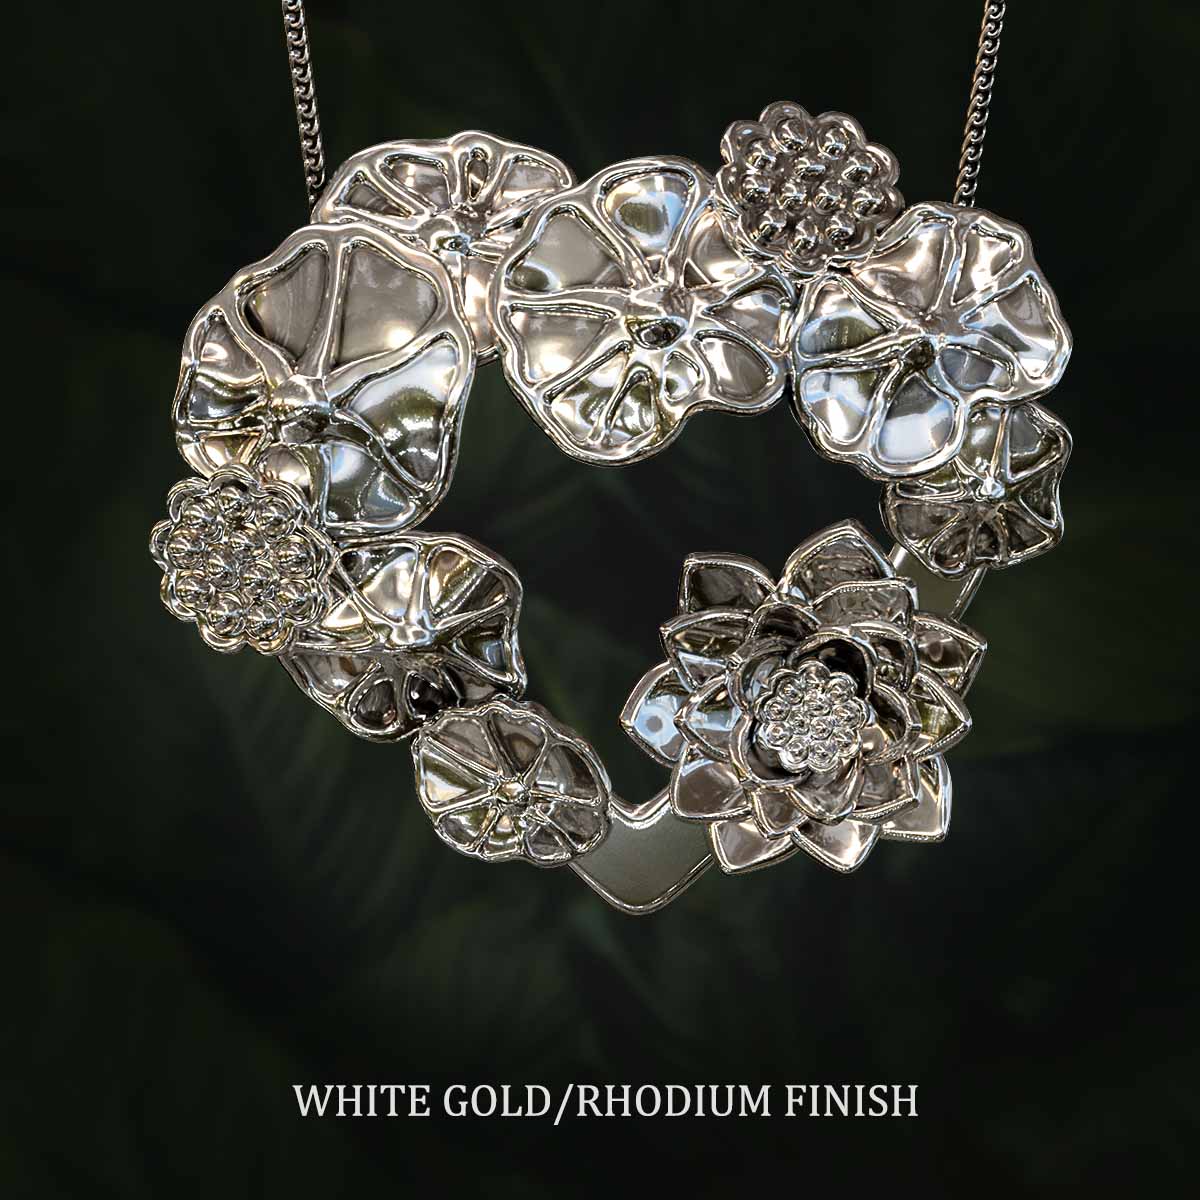 White-Gold-Rhodium-Finish-Lotus-Leaves-with-Flower-and-Seed-Pods-Pendant-Jewelry-For-Necklace